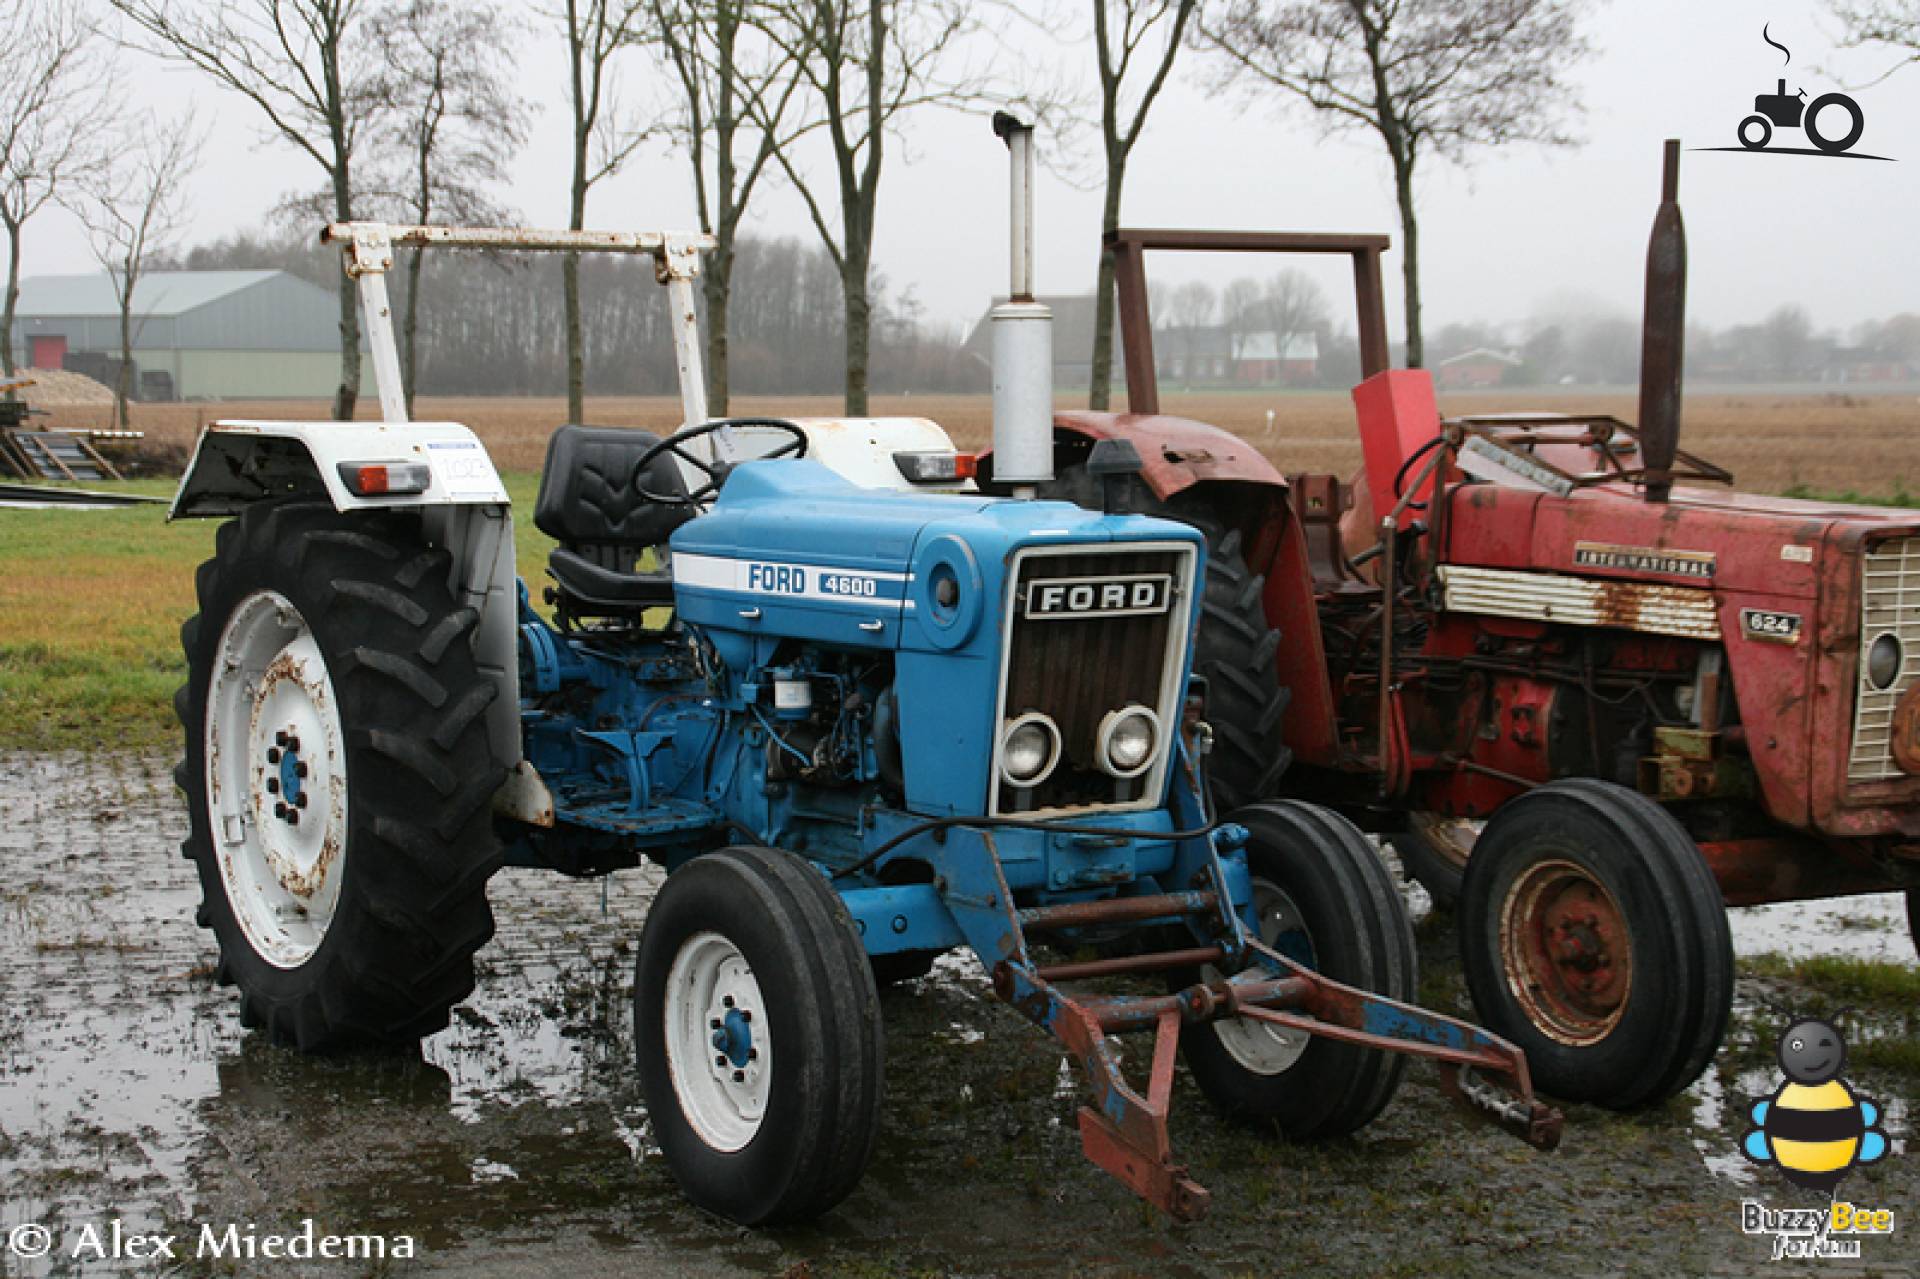 Ford 4600